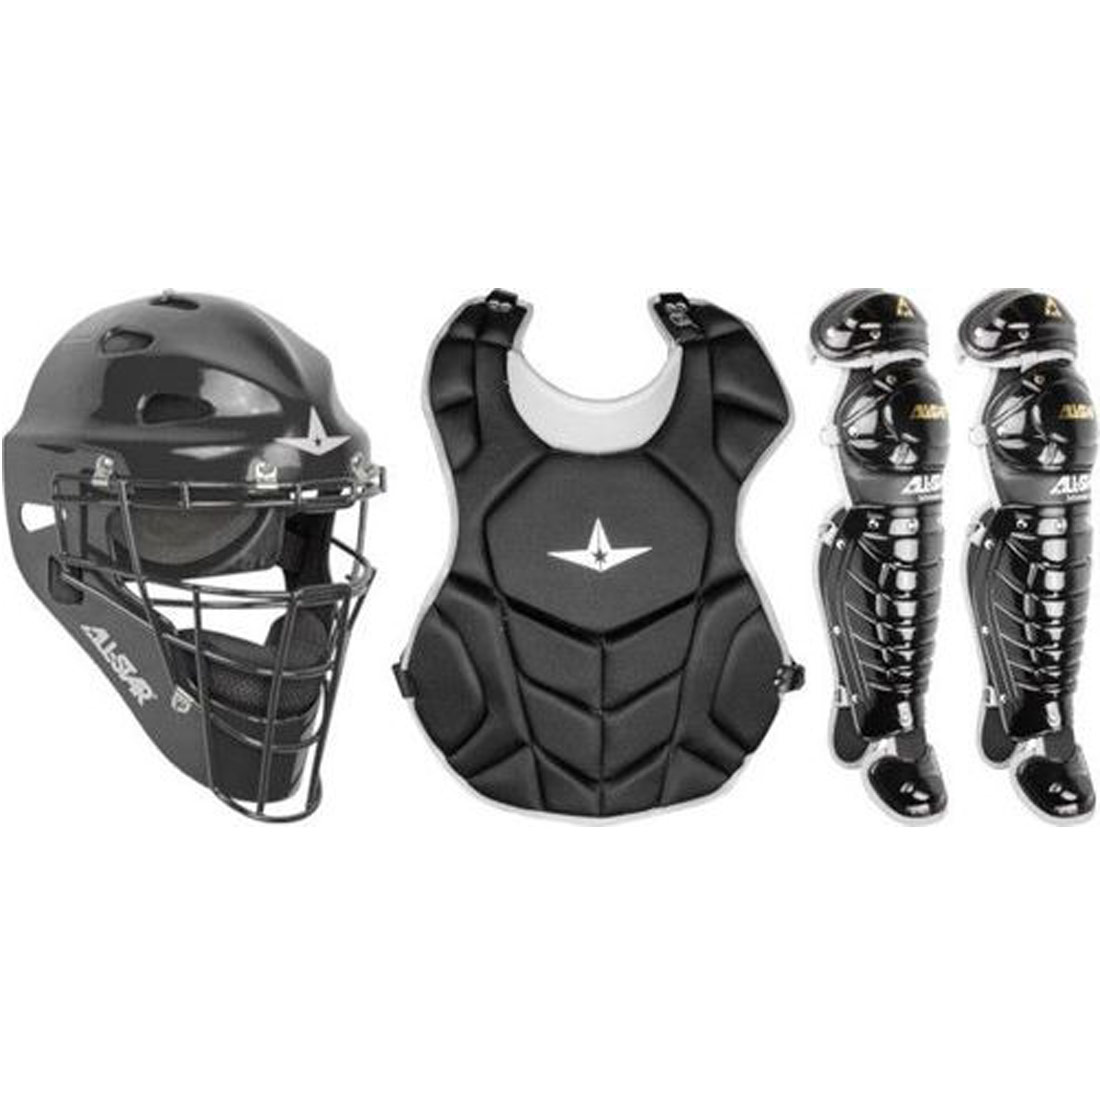 Youth Catcher's Gear Pack in BLACK Ages 9-12 